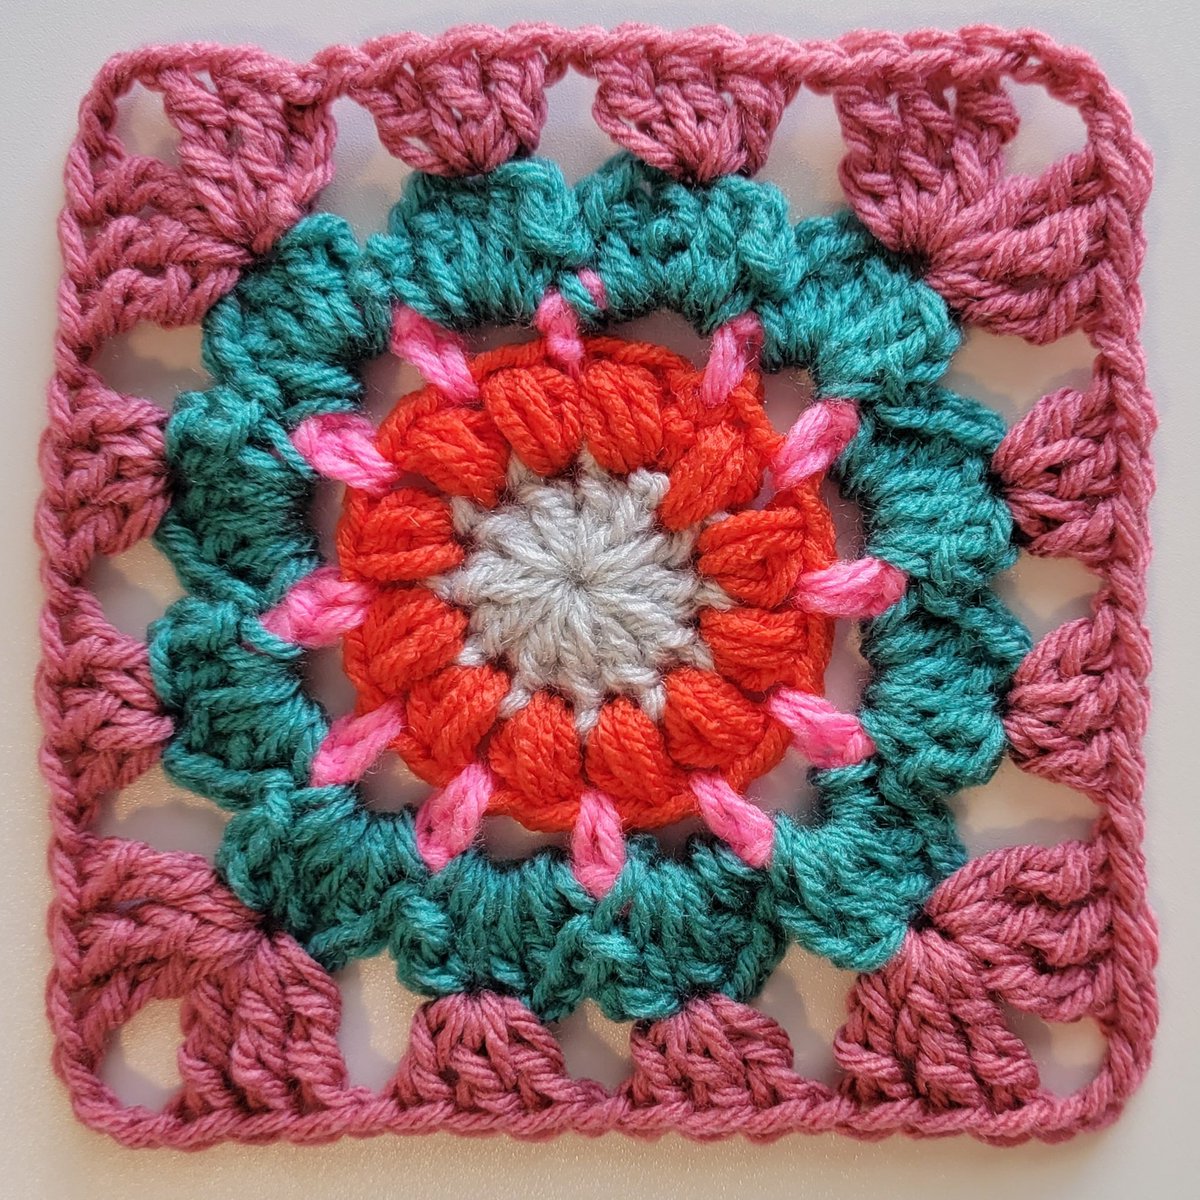 New free pattern from me: Soft Meadows Granny Square! Full pattern on my blog or grab the PDF from my Ravelry shop! Both links are in my bio! 👋💖😊 #yarn #fiberartist #crocheters #crocheting #crocheted #crochetpattern #crochetpatterns #freepattern #freepatterns